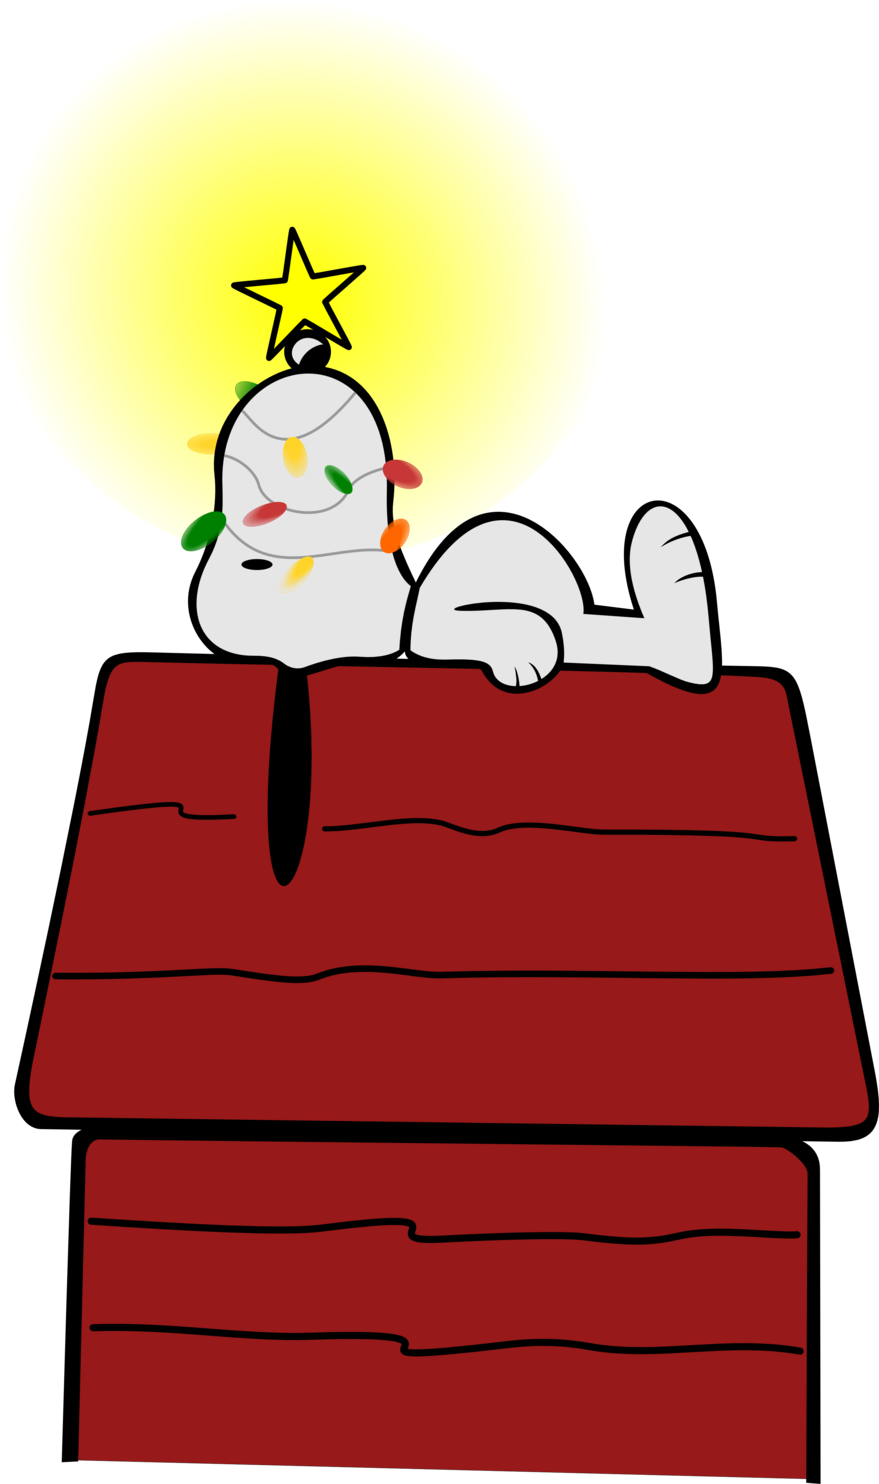 Snoopy kerst Transparant Image